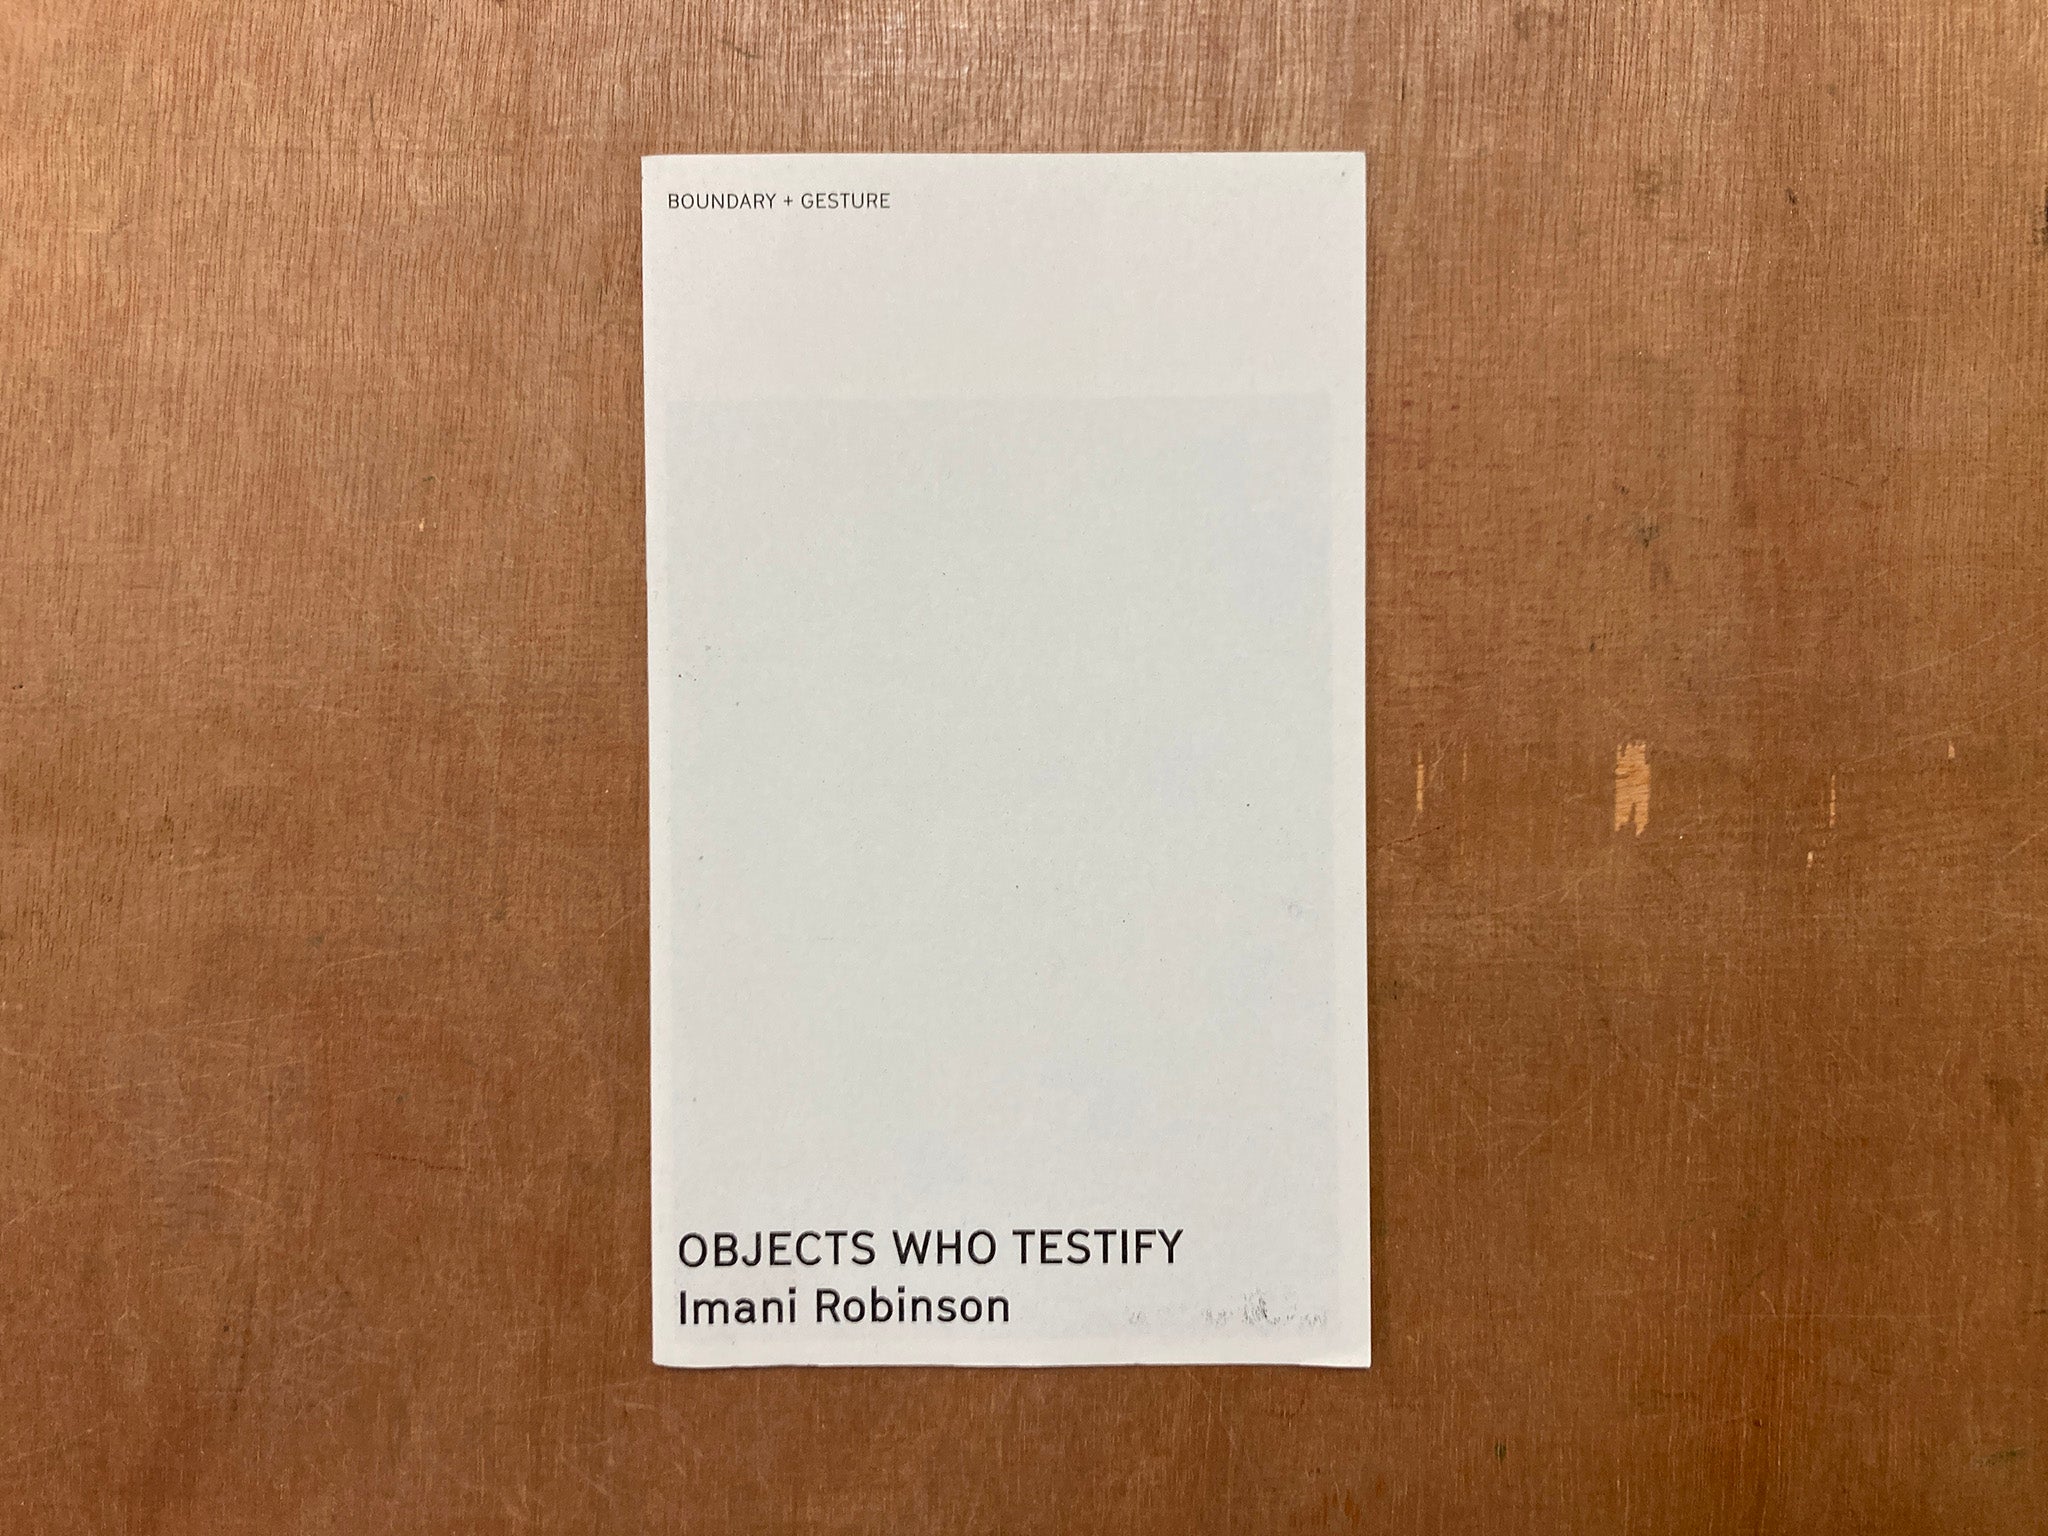 OBJECTS WHO TESTIFY by Imani Robinson